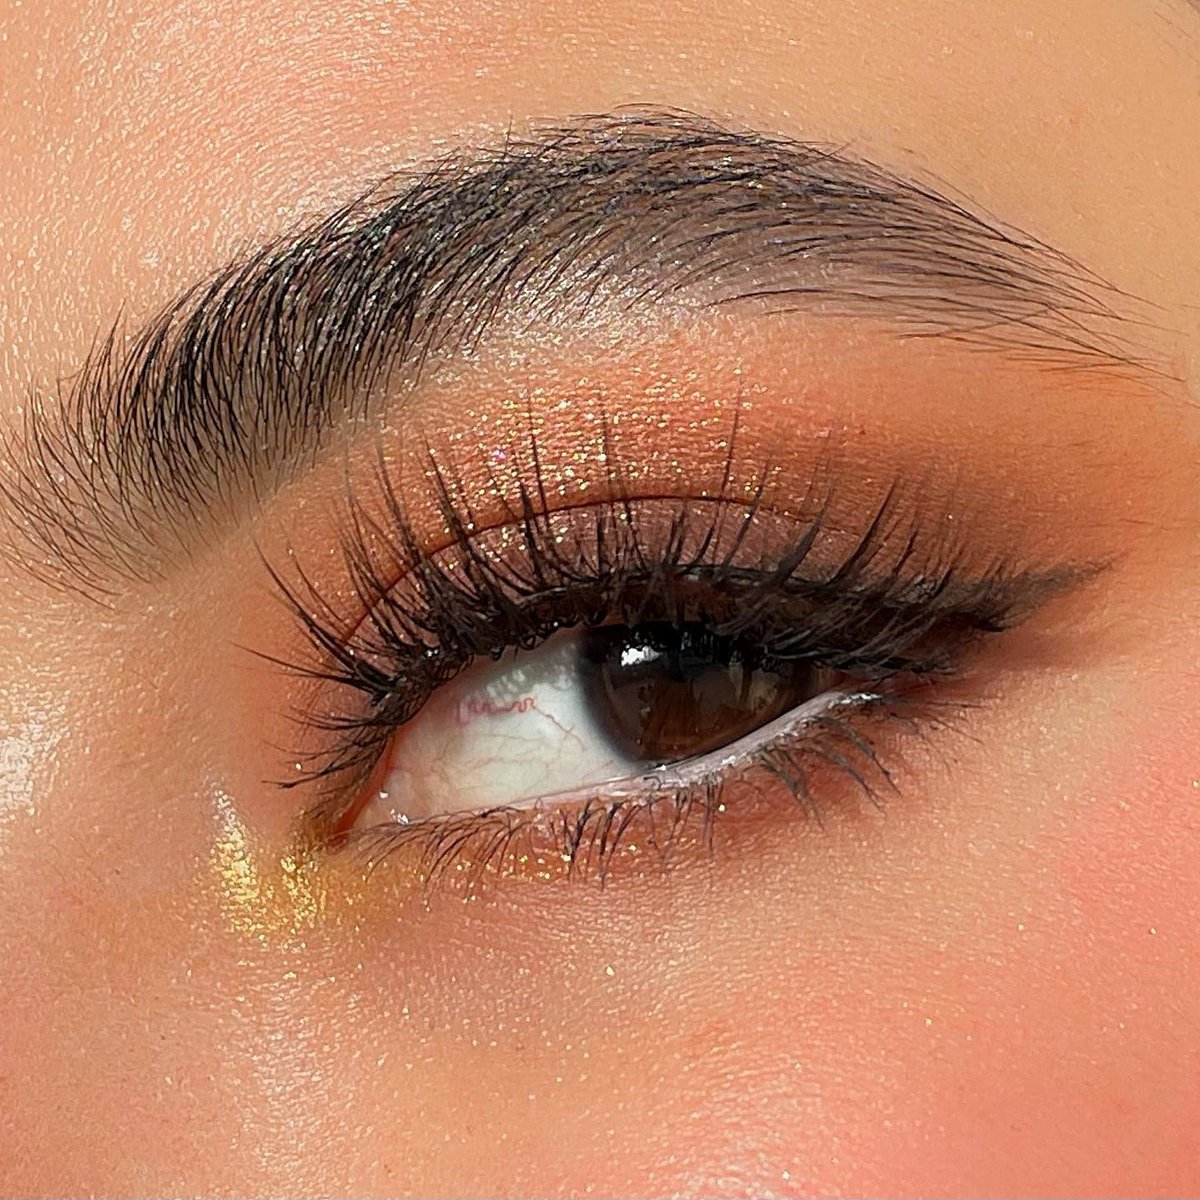 Captivated by these golden hues ✨ 

Get the ultimate golden-hour glow with this stunning mix of warm mattes, shimmers, and metallics. Our Ambiance Eyeshadow Palette has a little something for everyone. 

Shop now here: bit.ly/435SBn6

📸 IG: finzrella